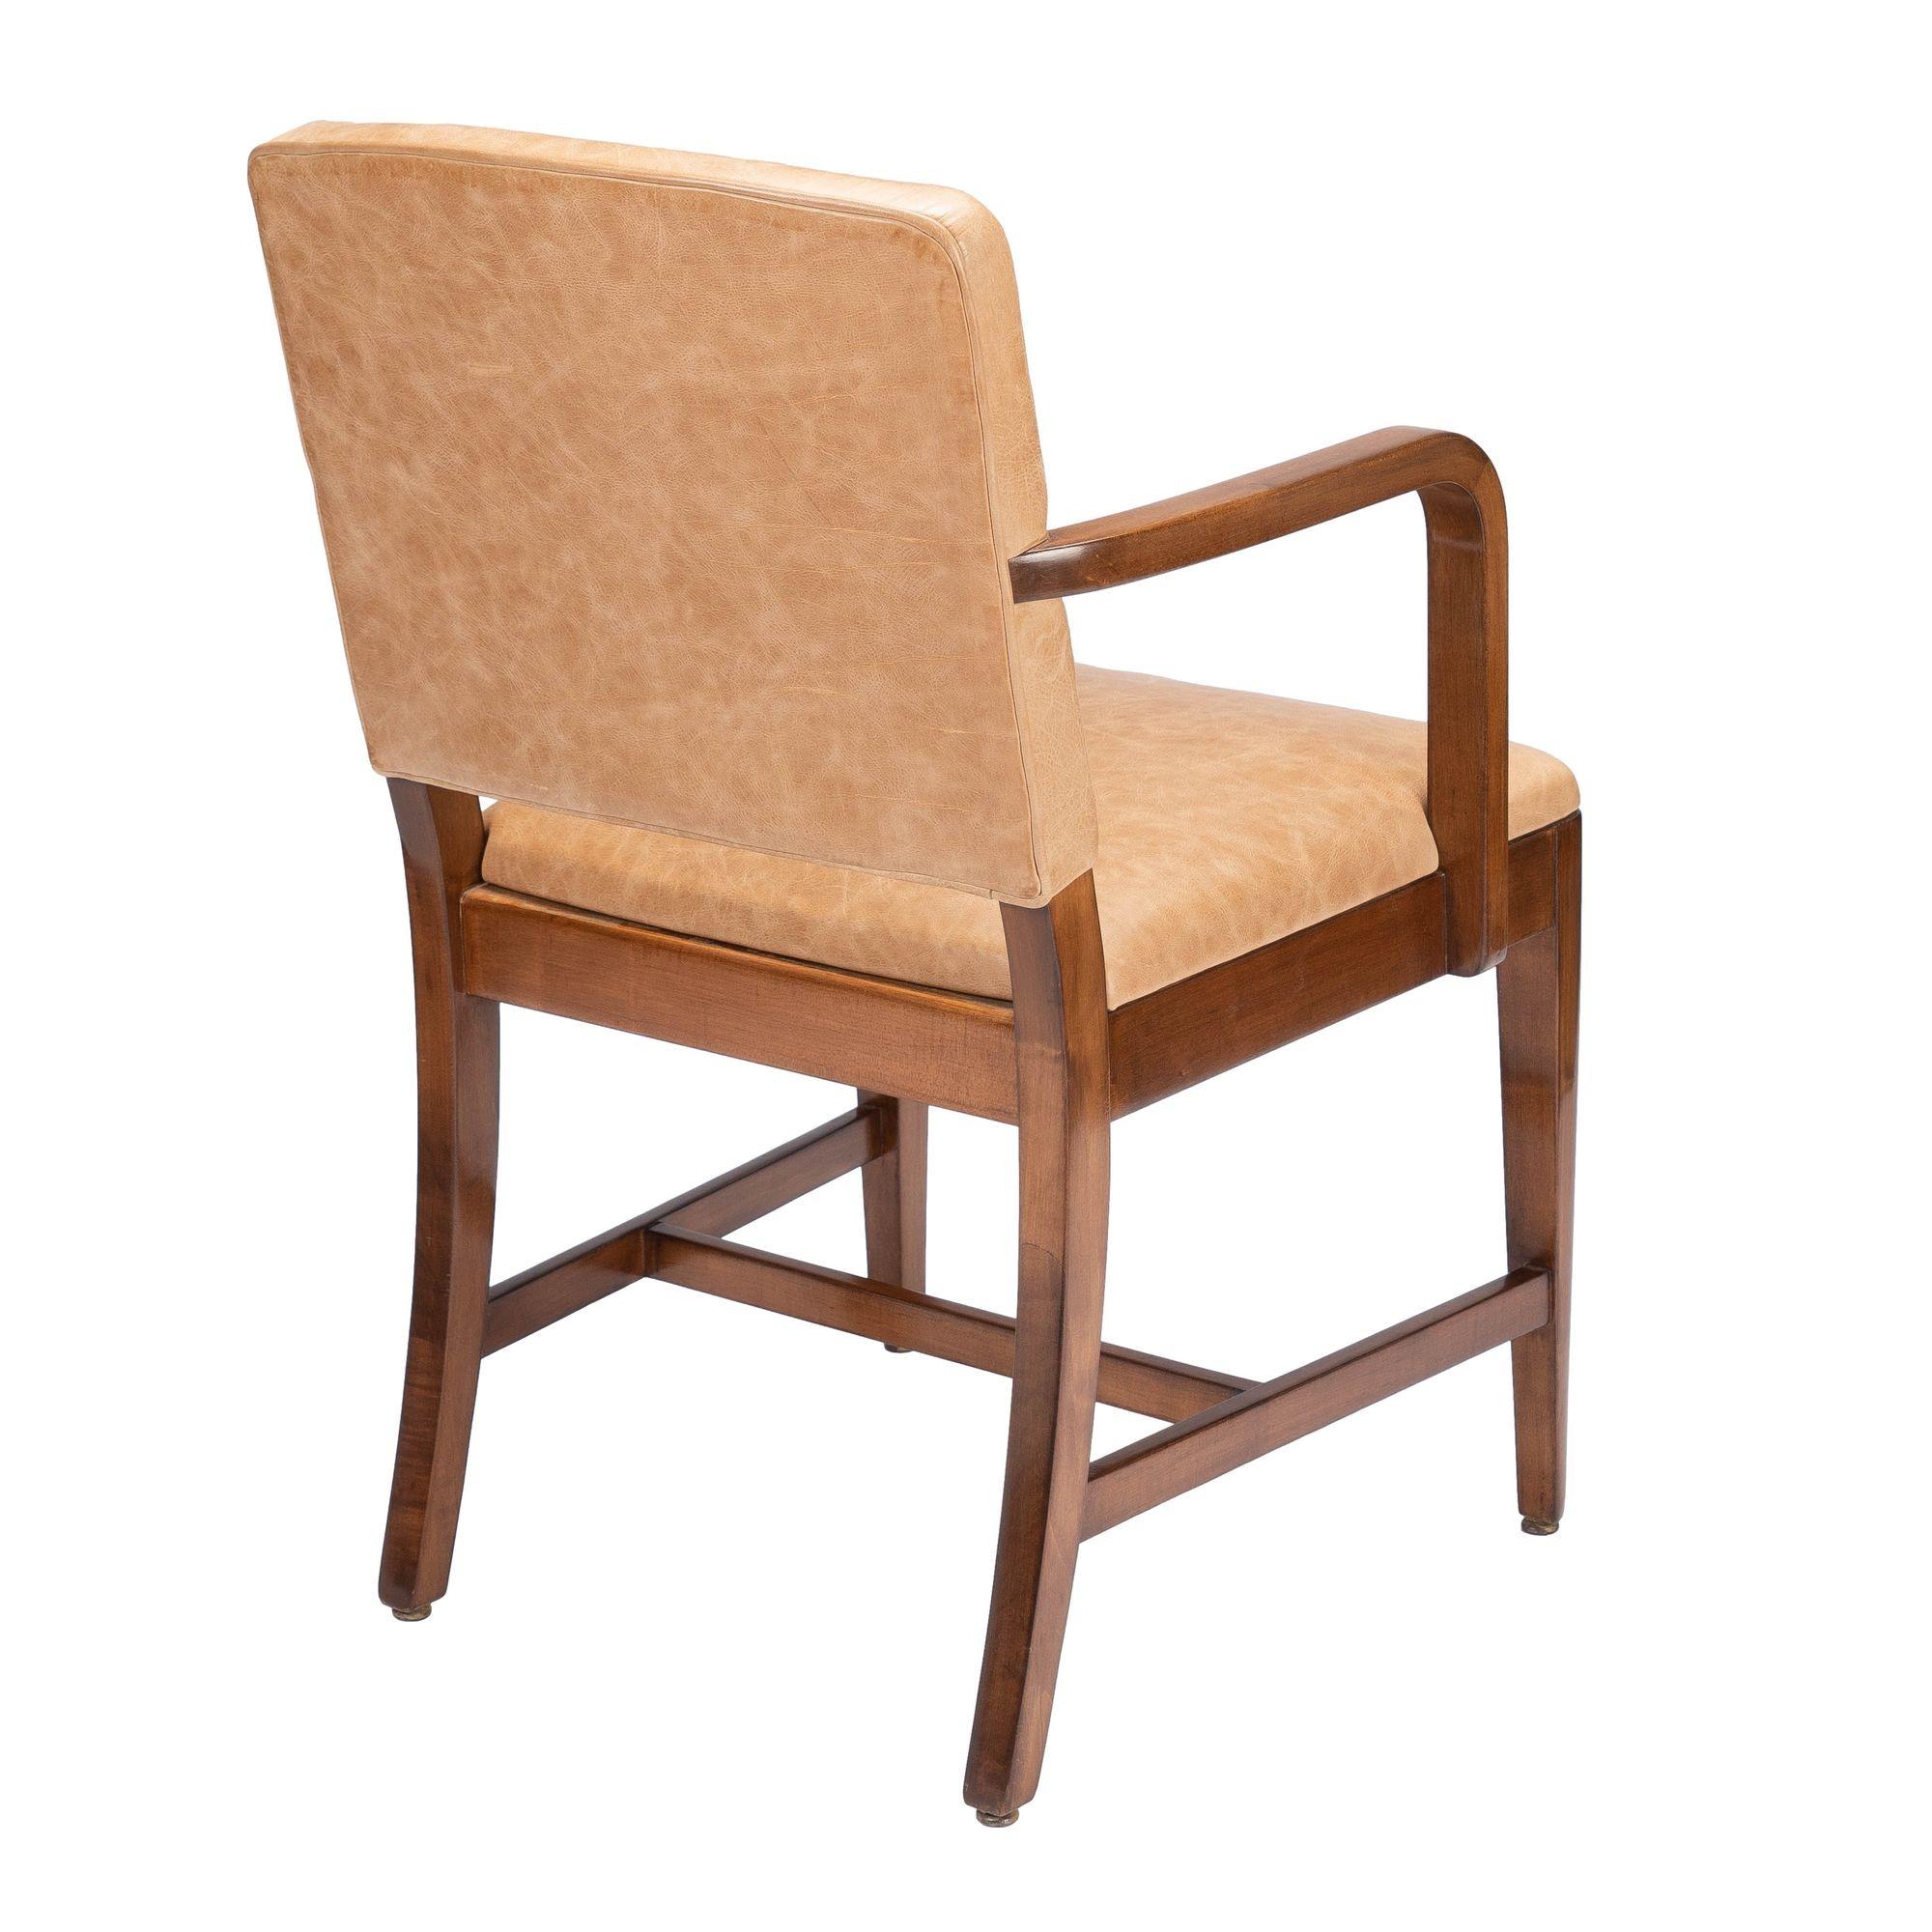 American Modernist Maple & Leather Armchair, c. 1940 For Sale 1